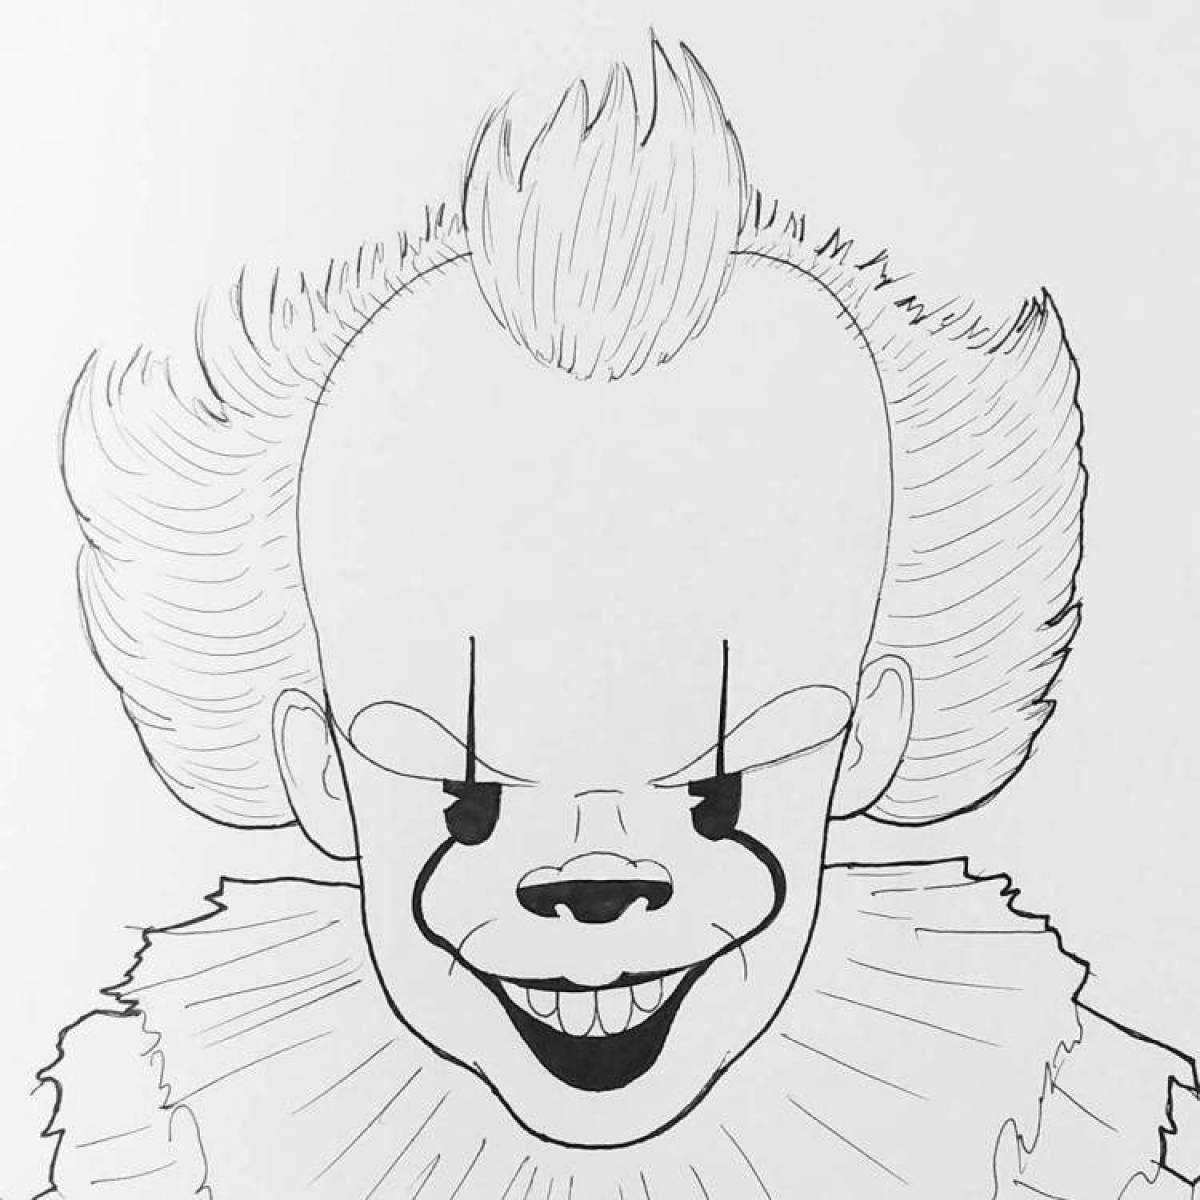 Pennywise the clown #5